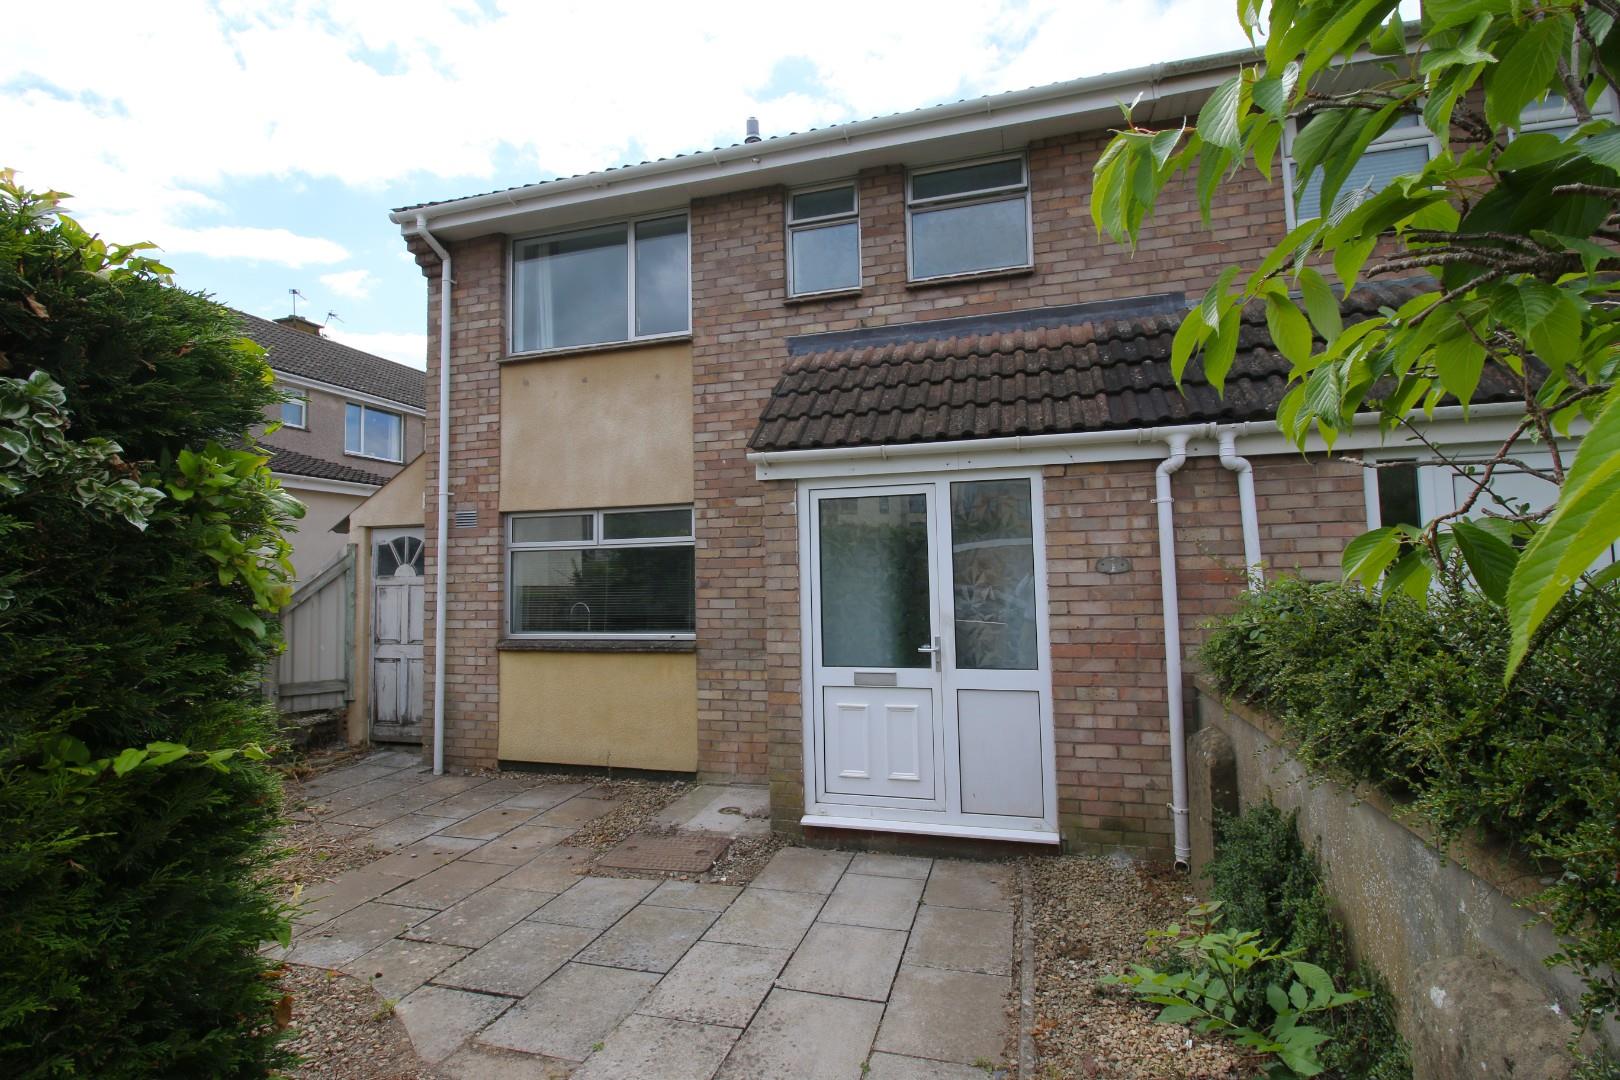 Refurbished three bedroom home in the centre of Yatton